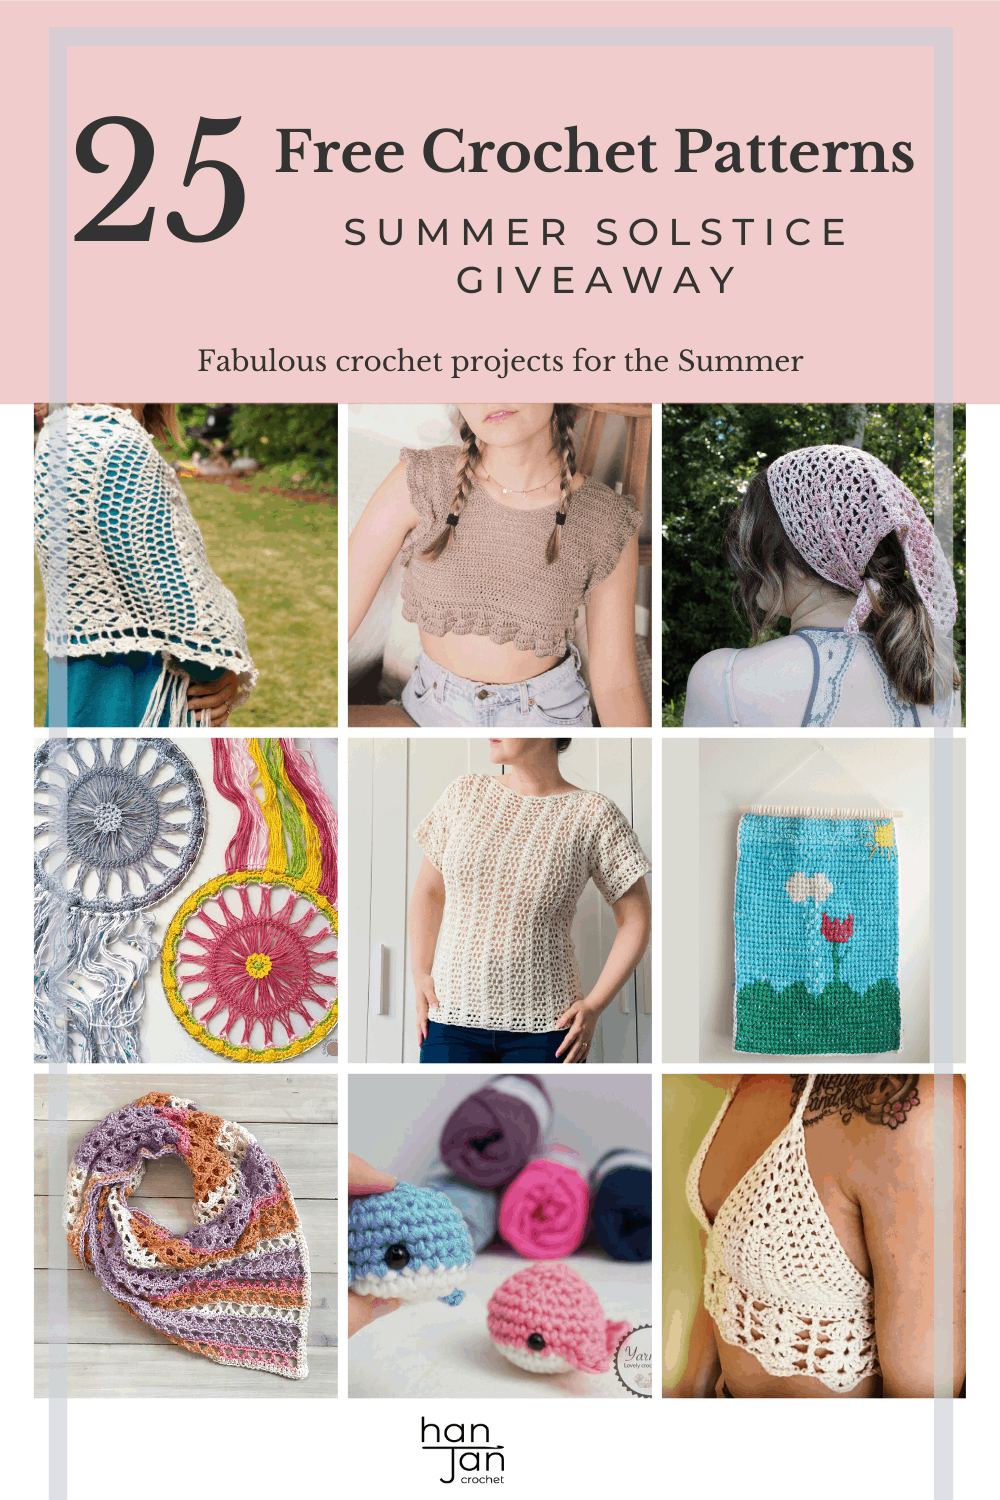 Enjoy 25 free Summer crochet patterns in the Summer Solstice Giveaway! Including cardigans, shawls, bags, amigurumi, homeware and accessories, there is something for everyone in this fabulous pattern giveaway. 